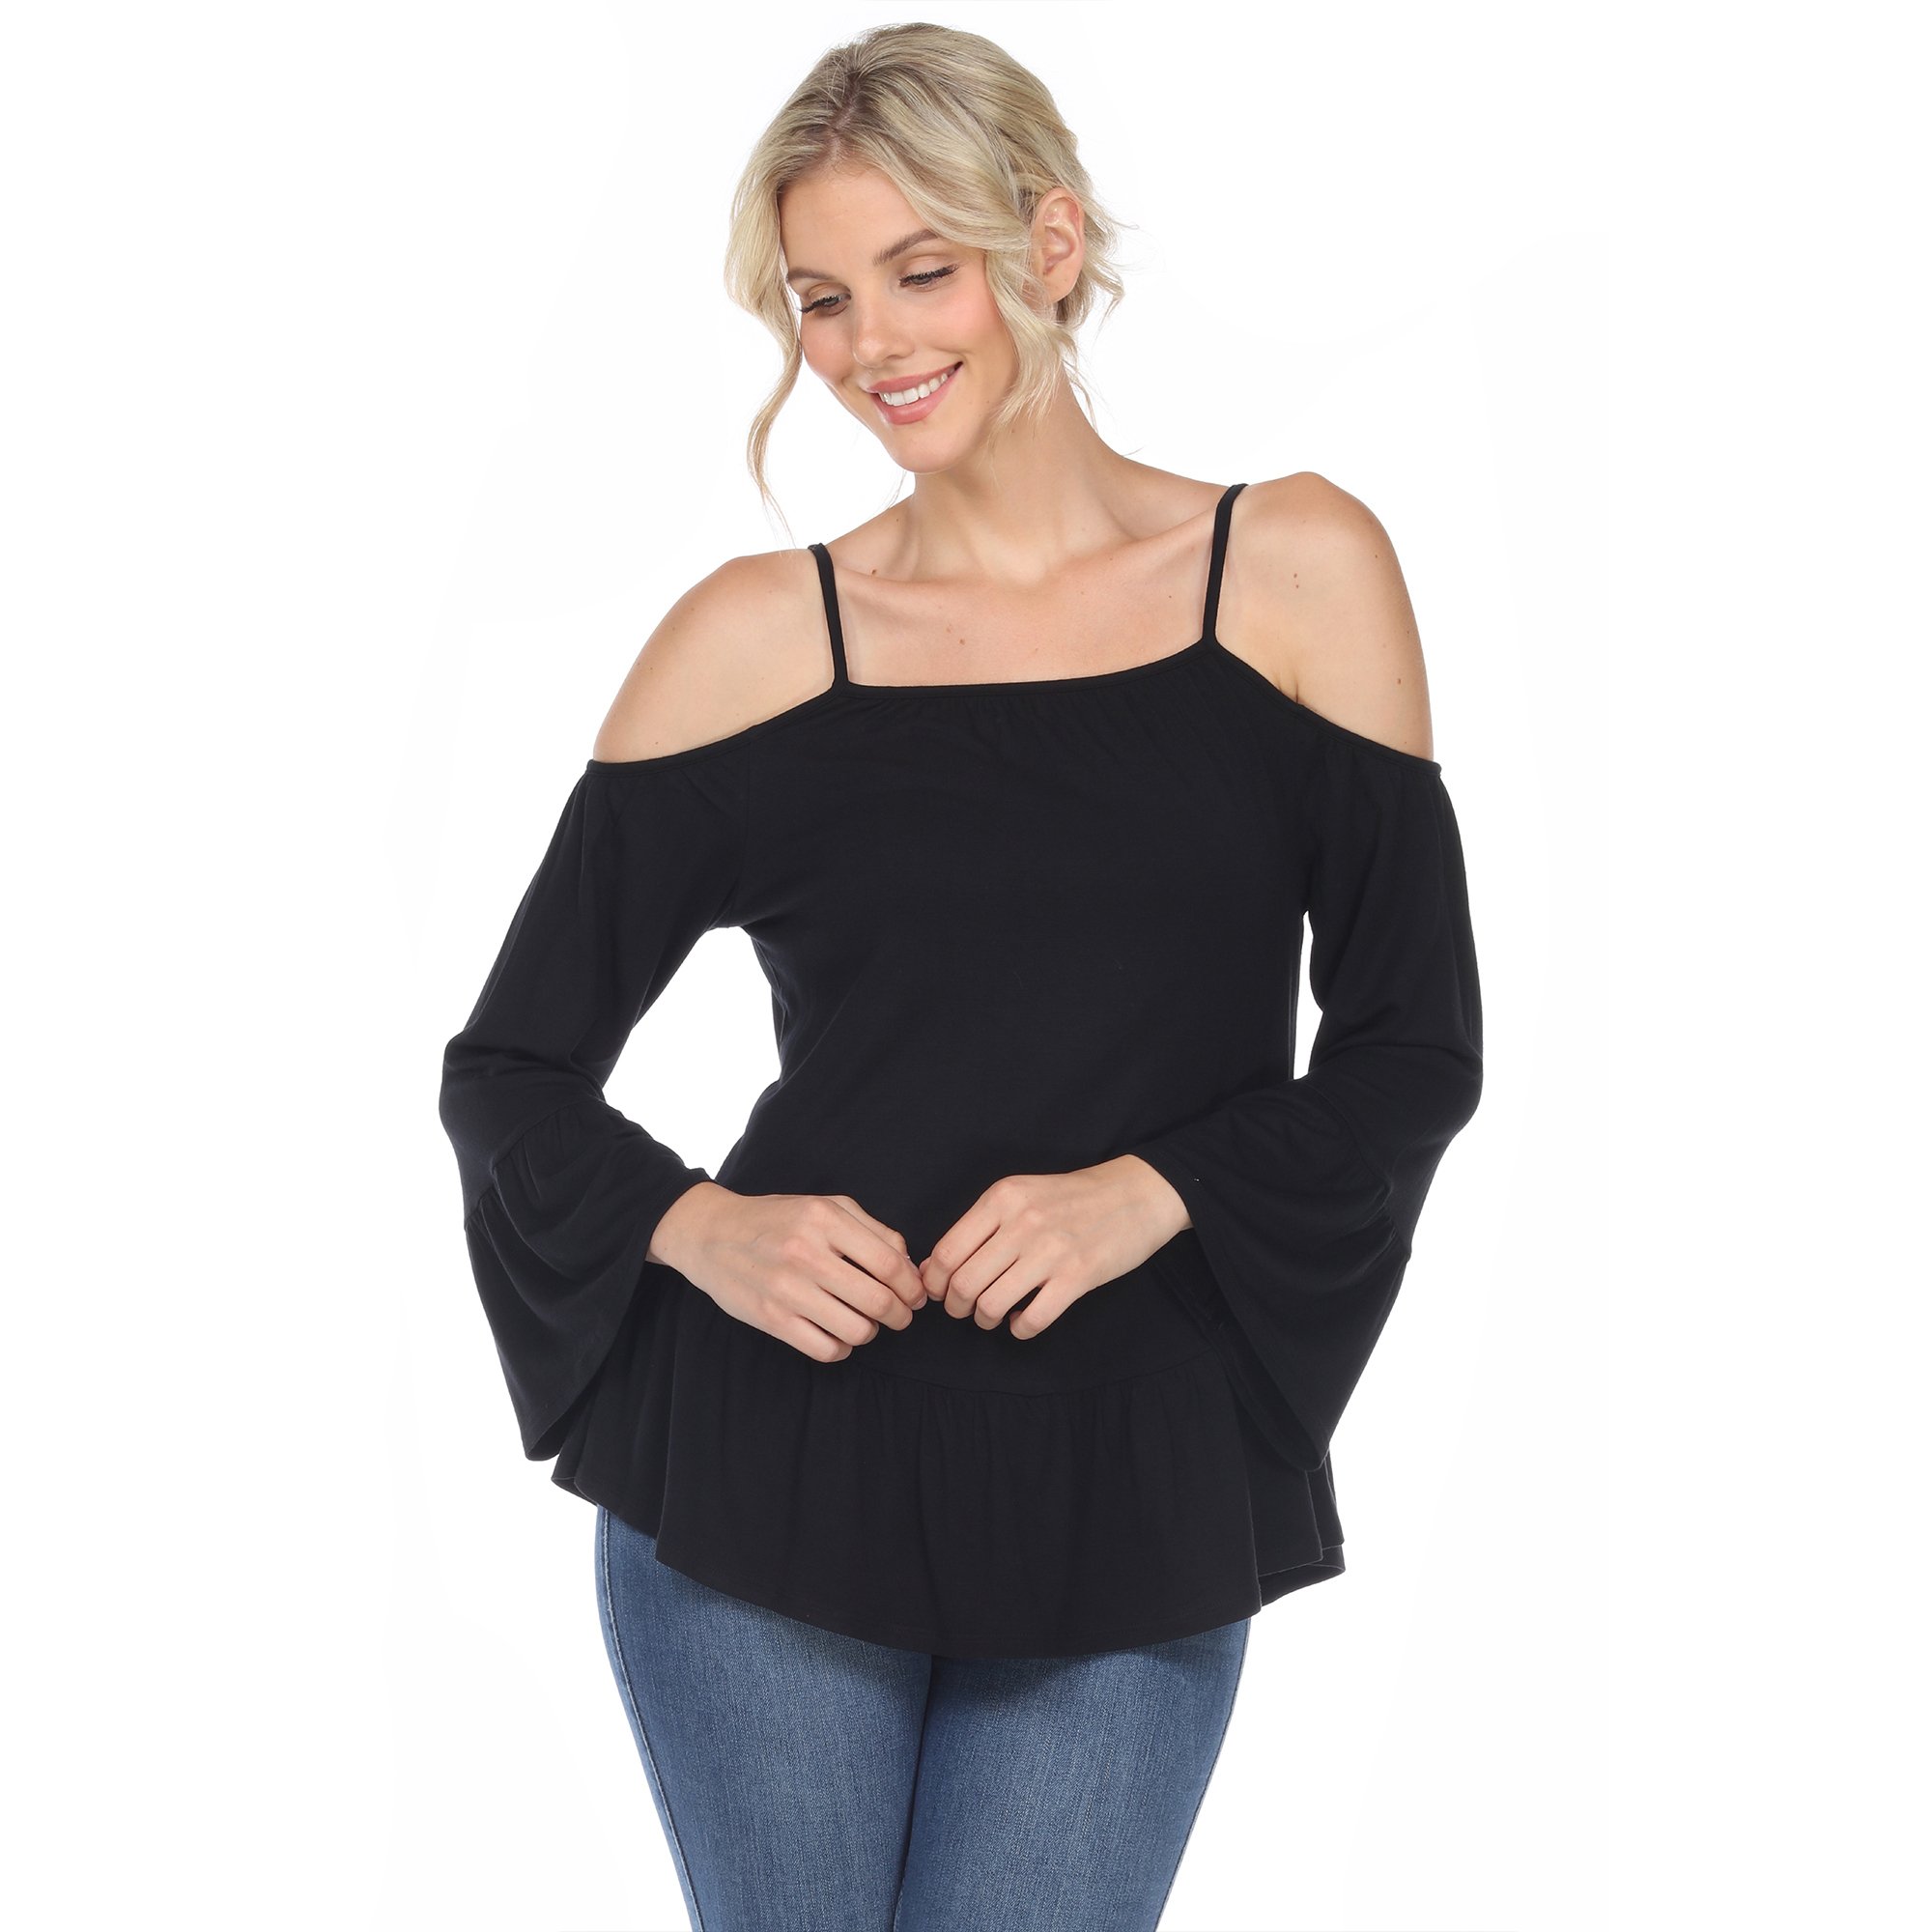 White Mark Women's Cold Shoulder Ruffle Sleeve Top - Black, Small